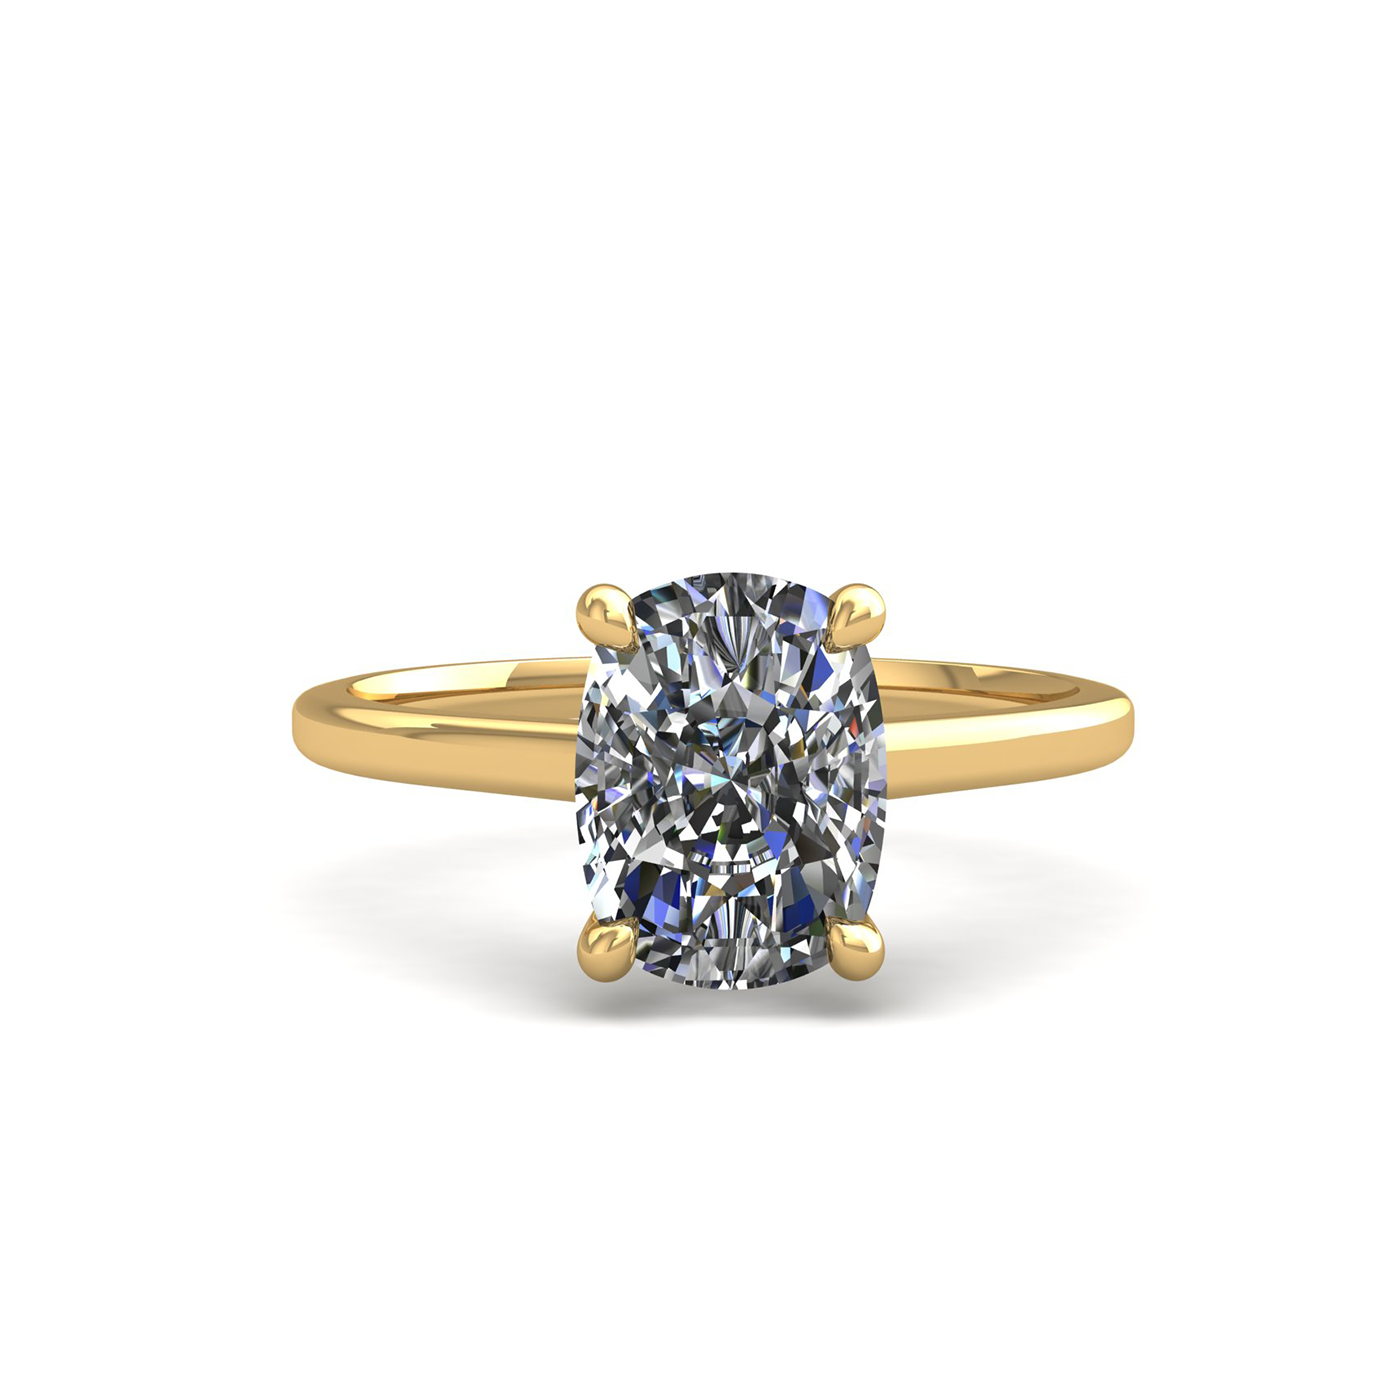 18k yellow gold  2.00 ct 4 prongs solitaire elongated cushion cut diamond engagement ring with whisper thin band